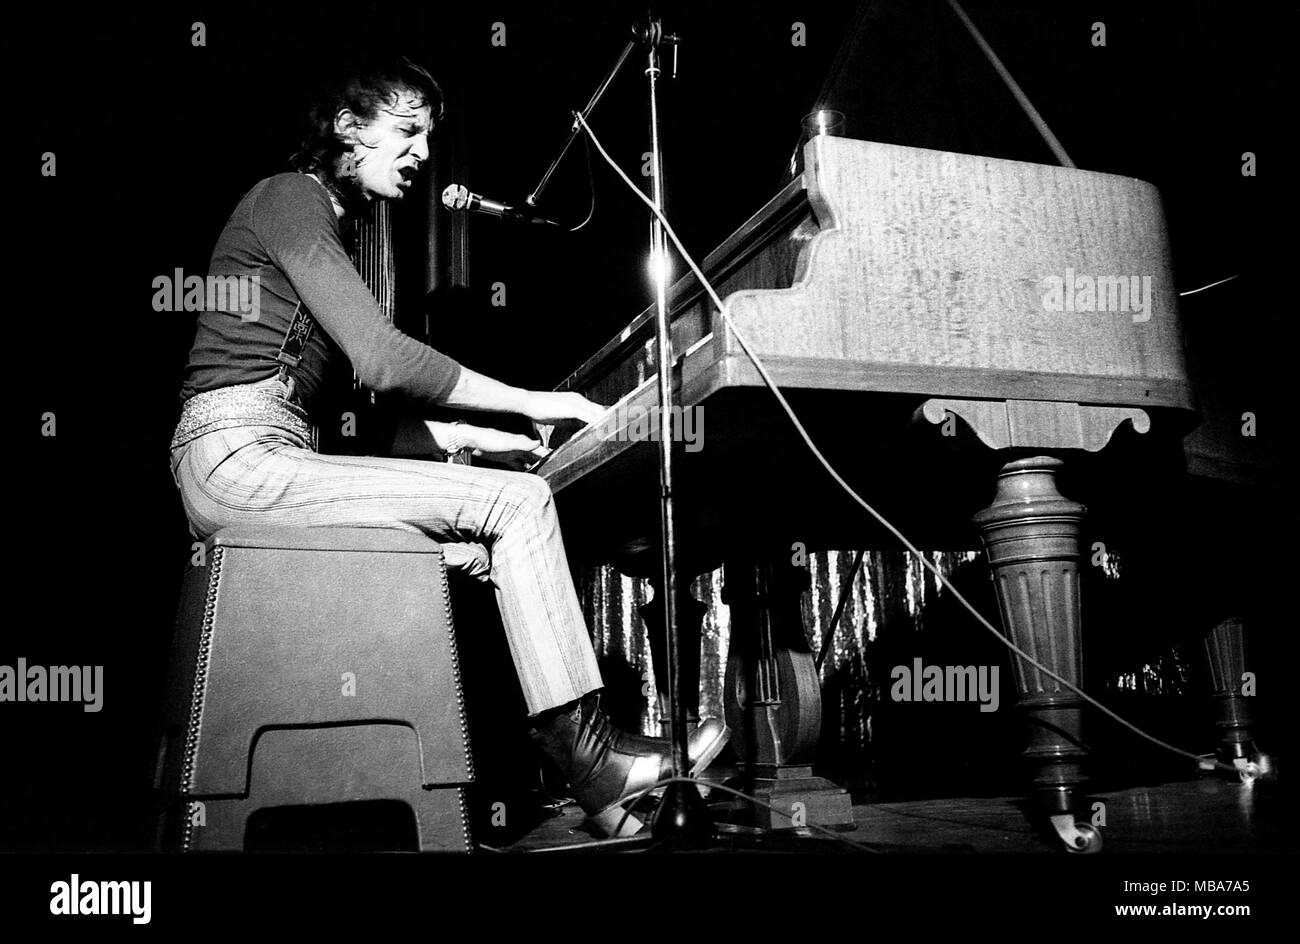 Philippe Gras / Le Pictorium -  Jacques Higelin -  1975  -  France / Ile-de-France (region) / Paris  -  Jacques Higelin, Concert at Olympia, 1975 Stock Photo